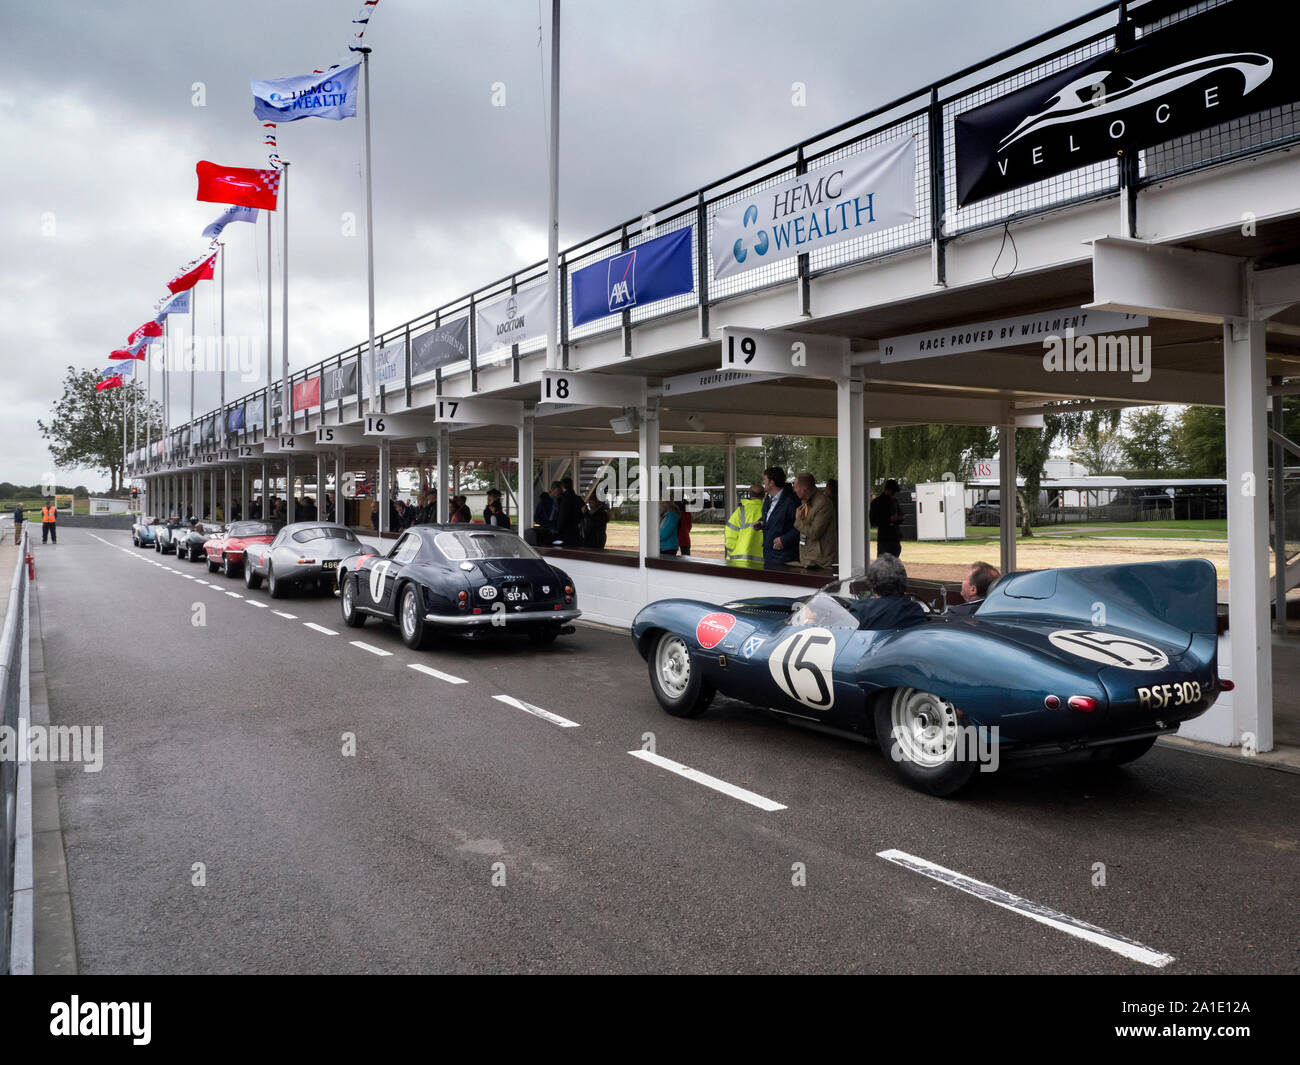 1956 Jaguar D Typt and other classic cars at the Veloce Charity Track day at Goodwood 25/9/19 Stock Photo